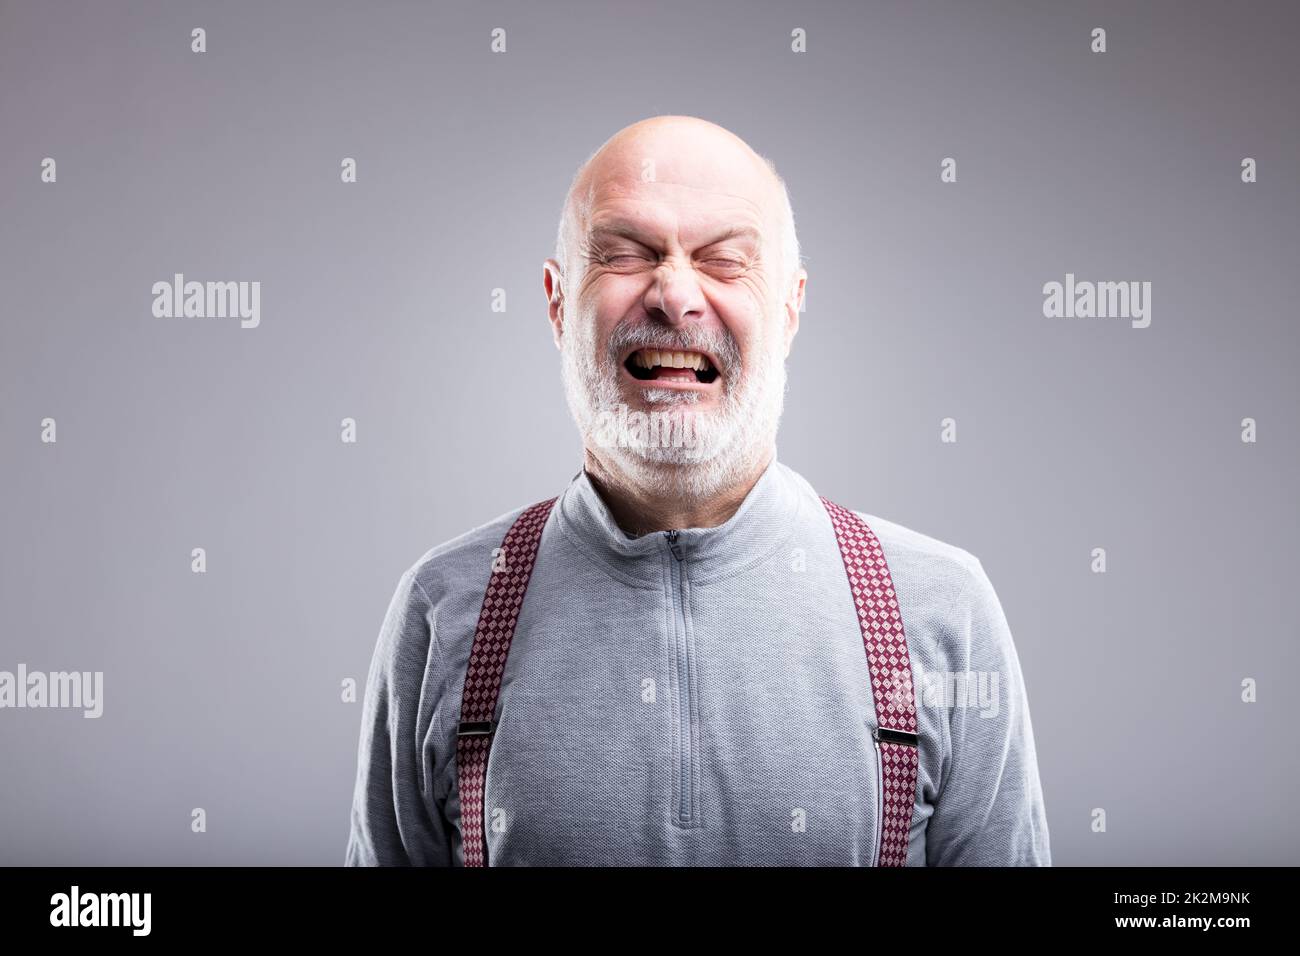 exaggerated tearing old man expression Stock Photo